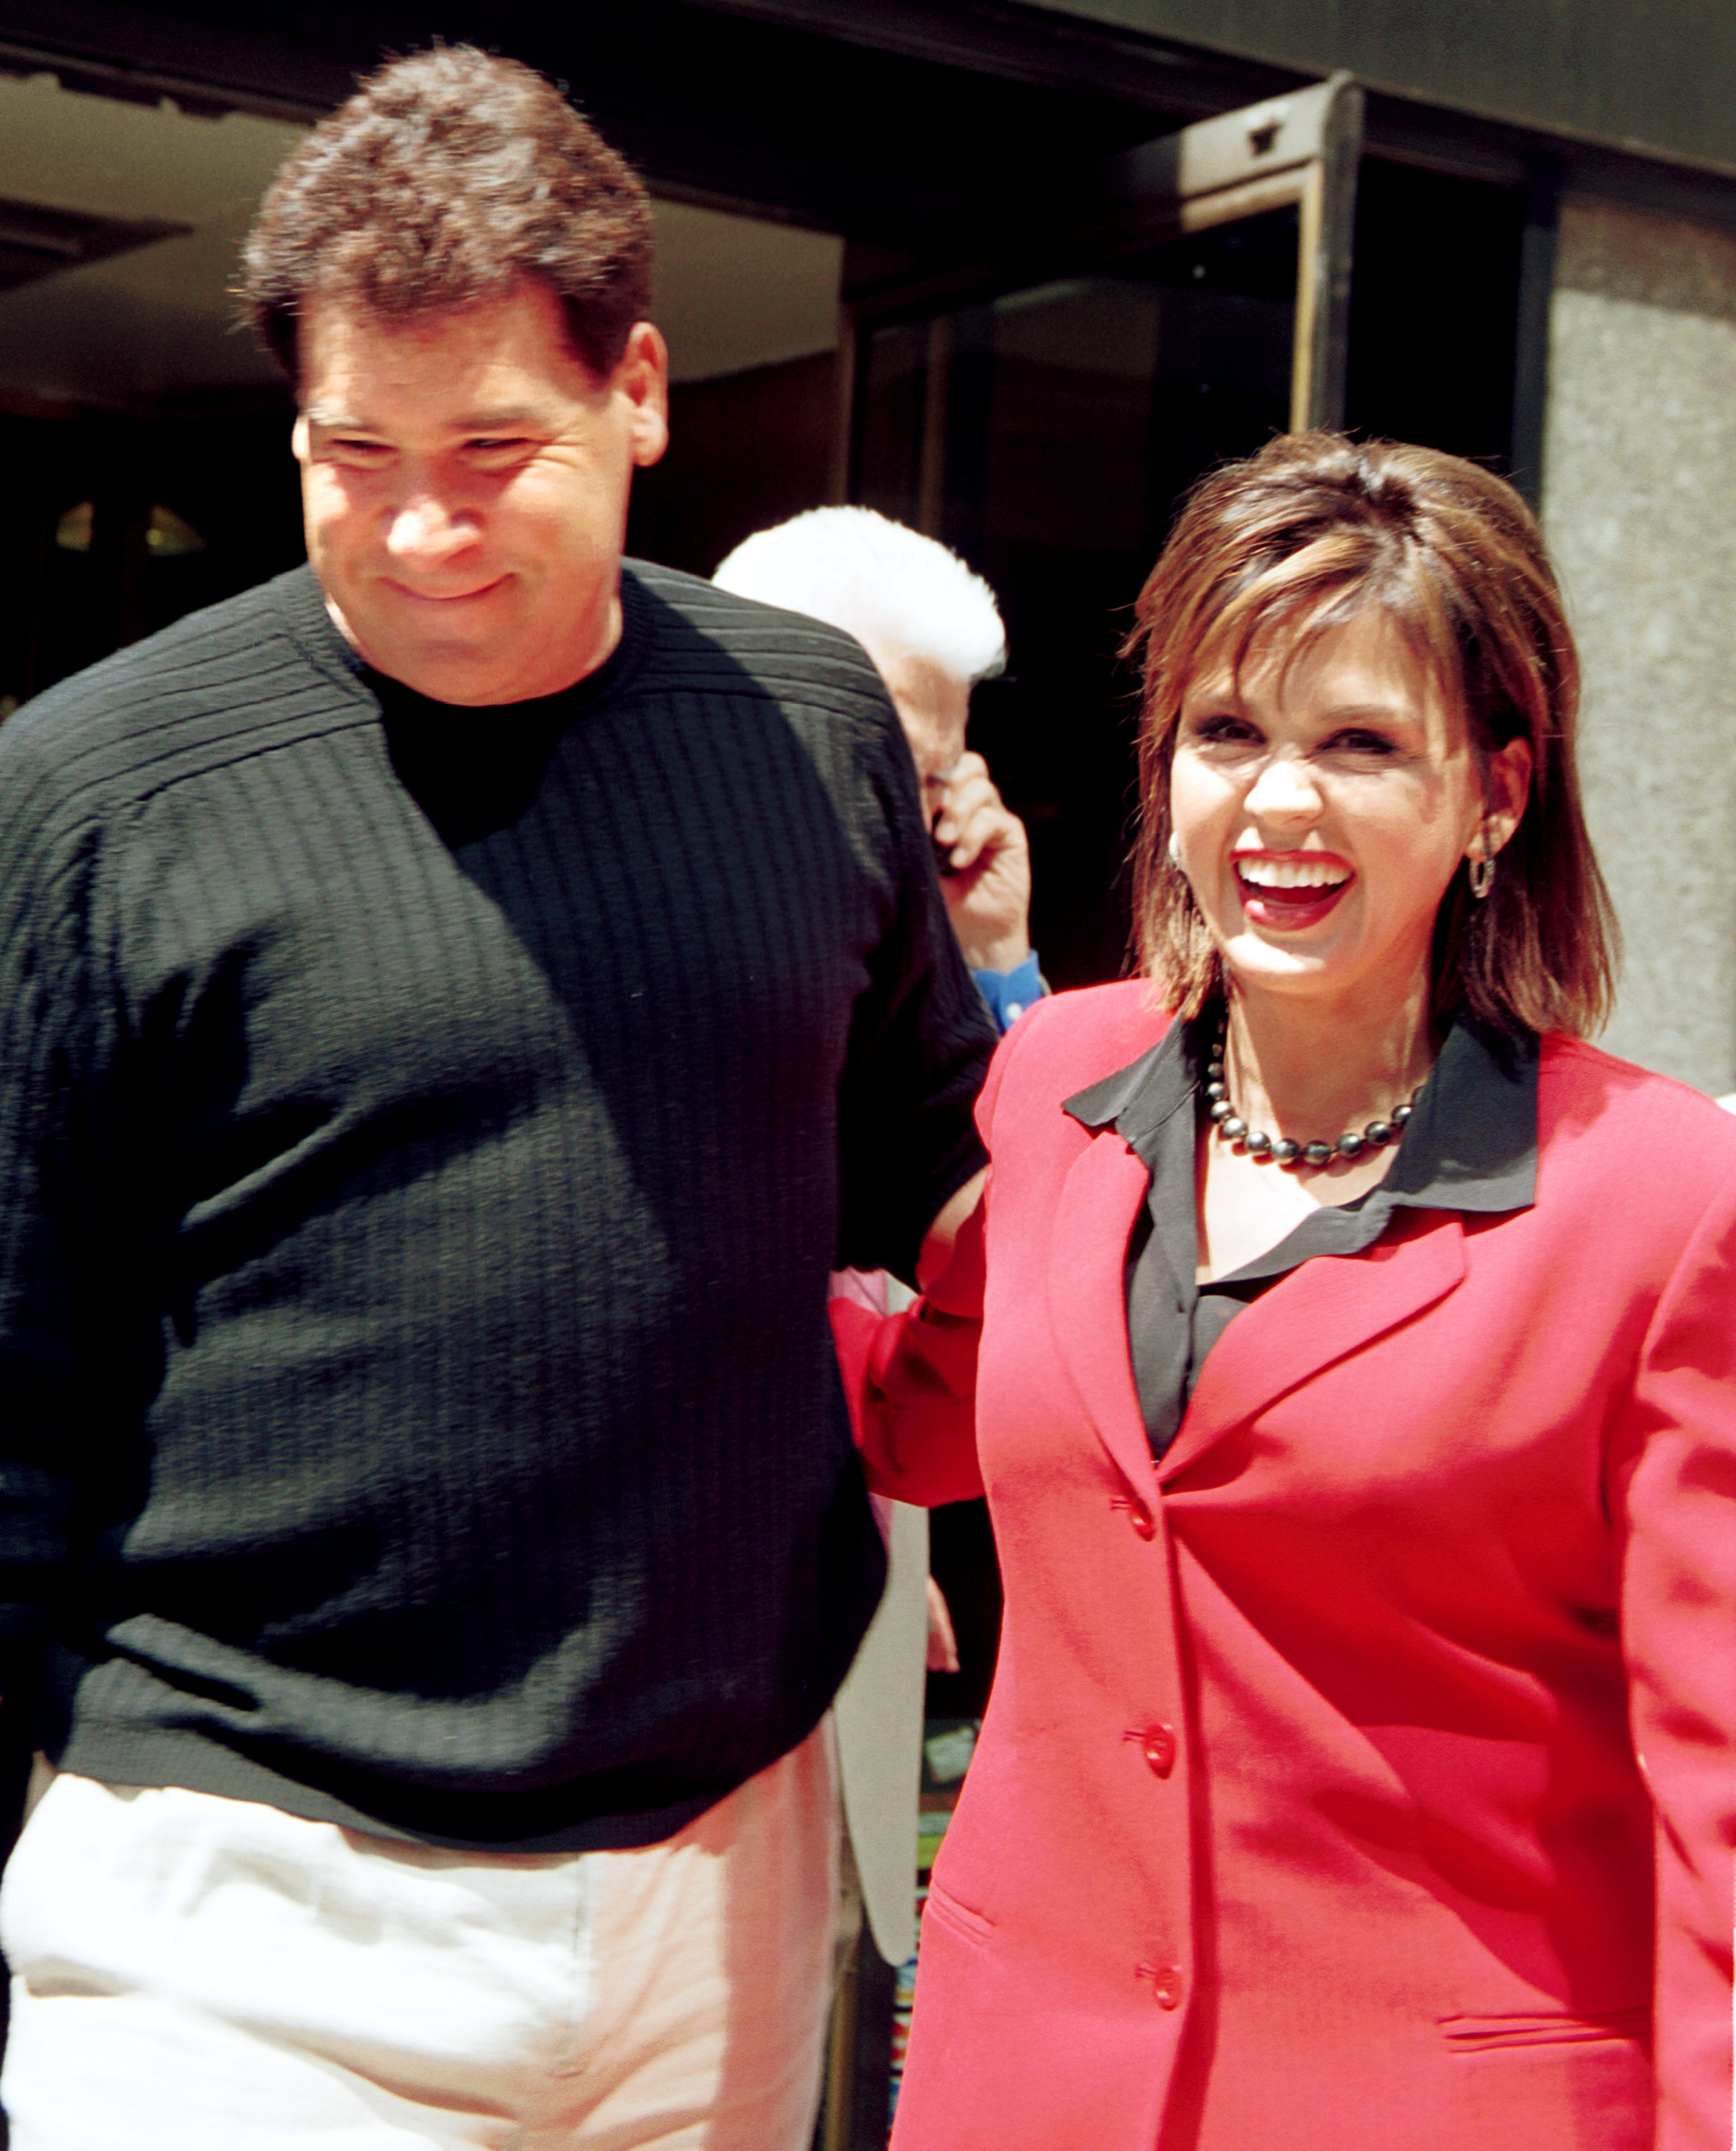 Marie Osmond and Brian Blosil leave a book signing for her new book "Behind the Smile" May 1, 2001, in New York City. | Source: Getty Images